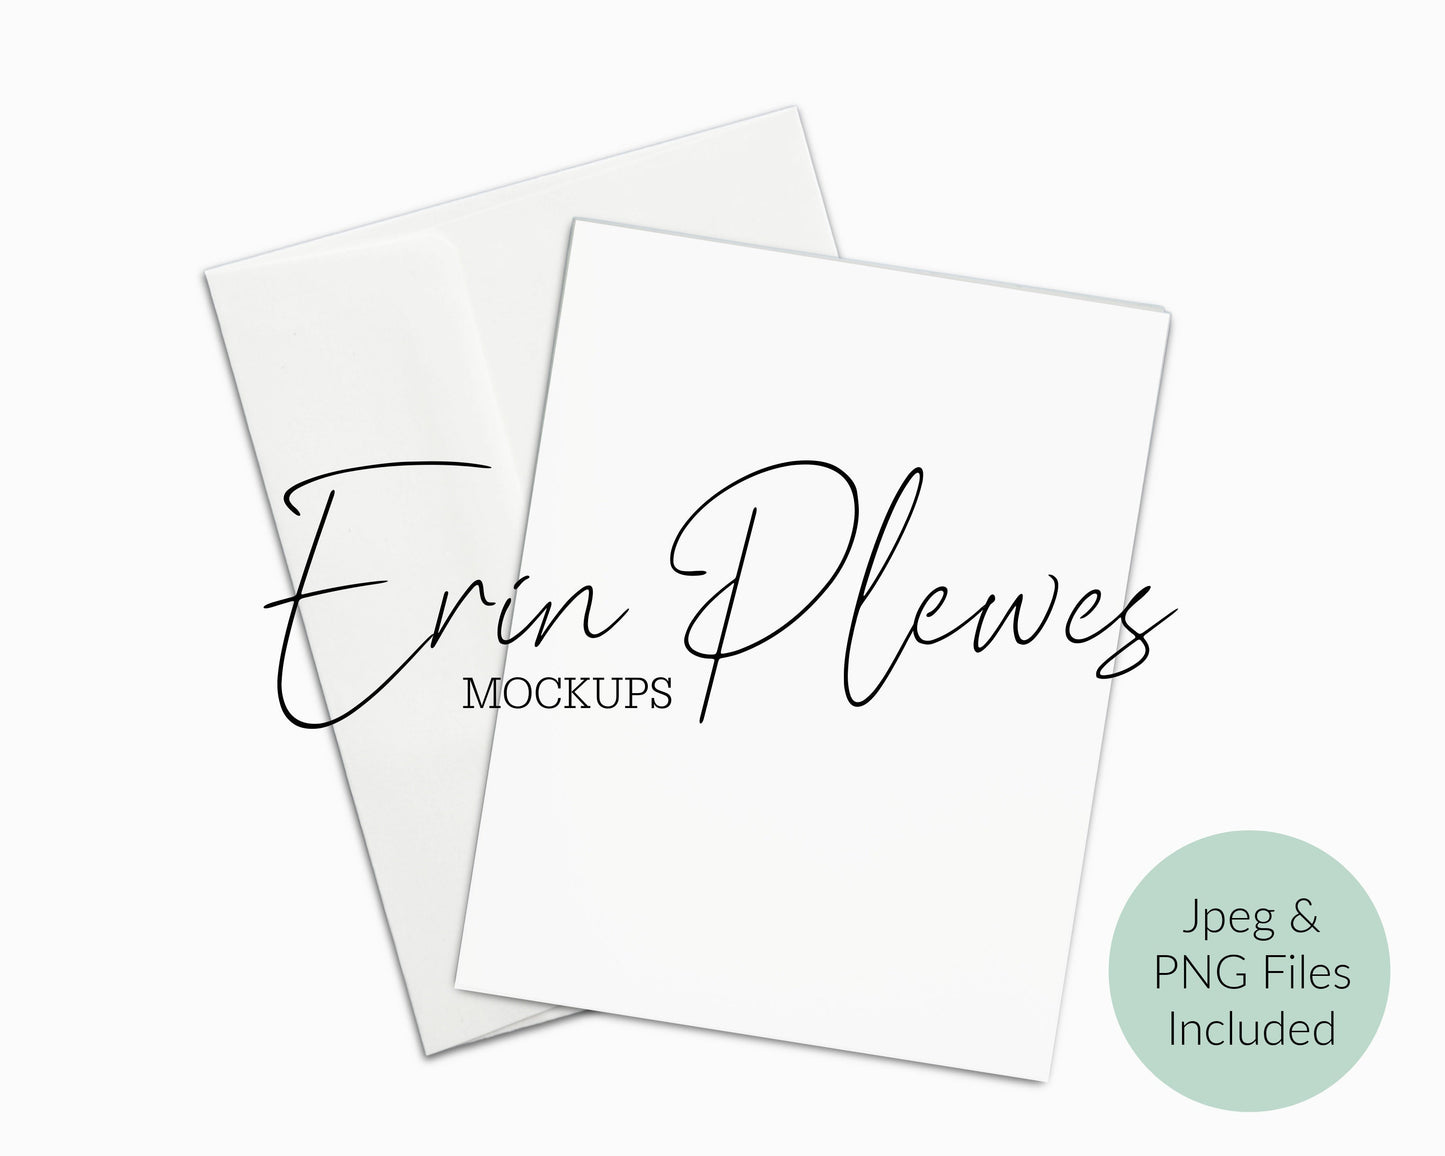 White Card Mockup, A2 Greeting card mock-up with white envelope, Minimalist card stock photo, Jpeg PNG Instant Digital Download